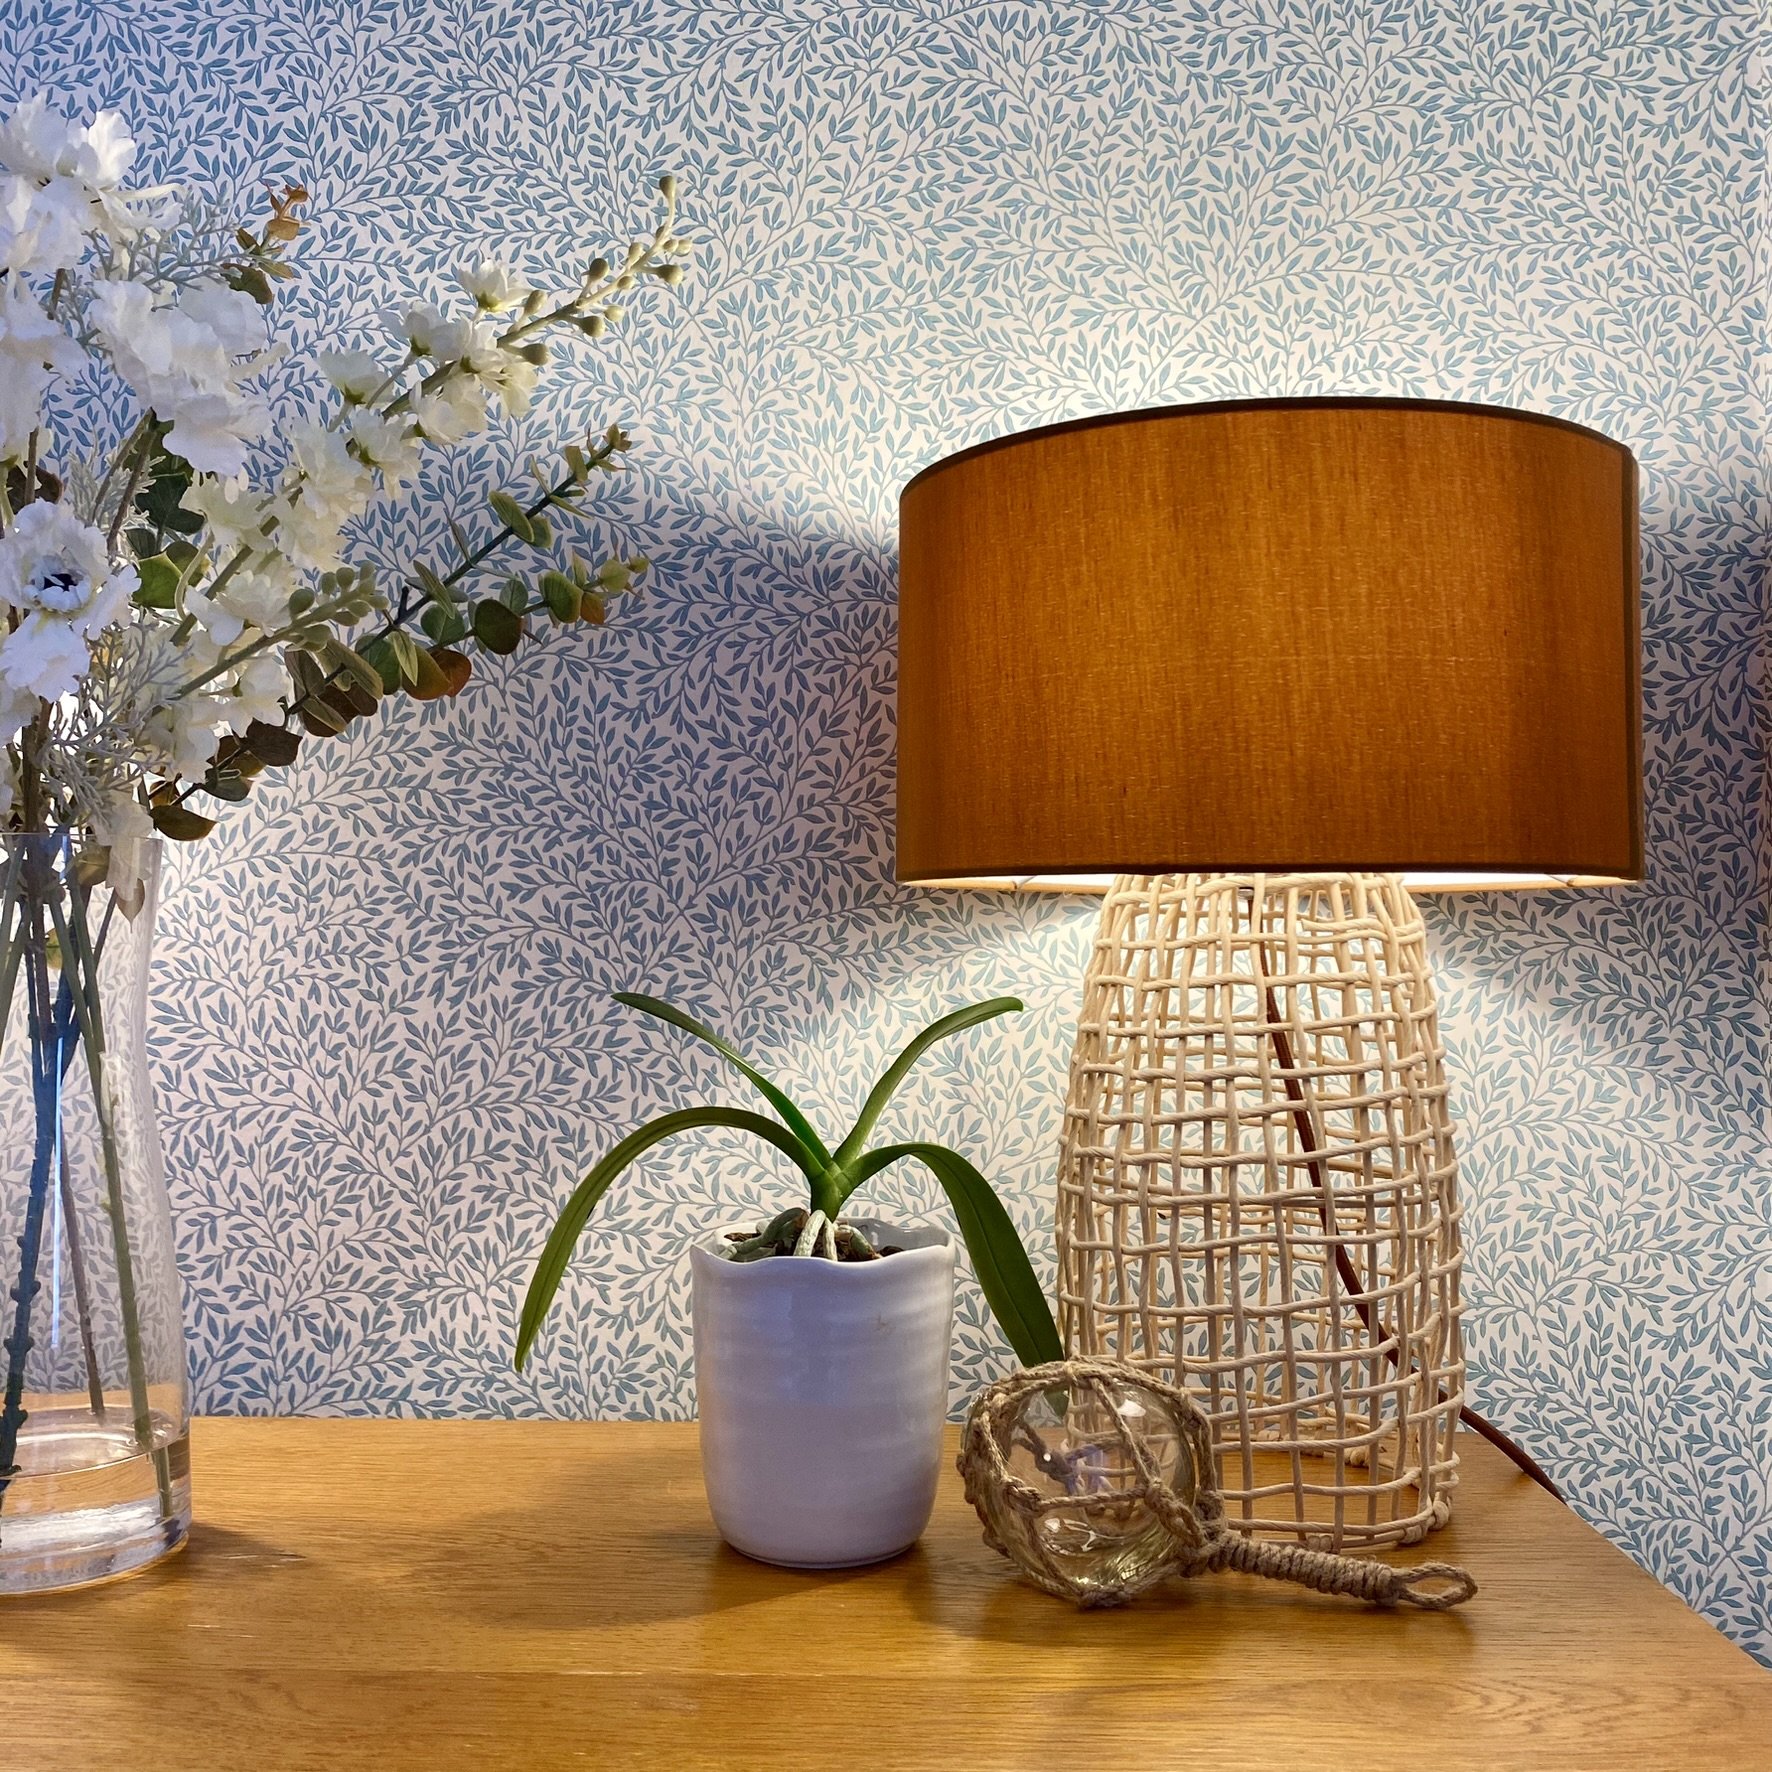 A @habitatuk lamp and @wmorrisandco wallpaper help to brighten the corner of this bedroom. The wallpaper is called Standen (colour: seaglass), and was reprinted in 2017 for a restoration project at Standen House in Sussex. See photo.

#williammorris 